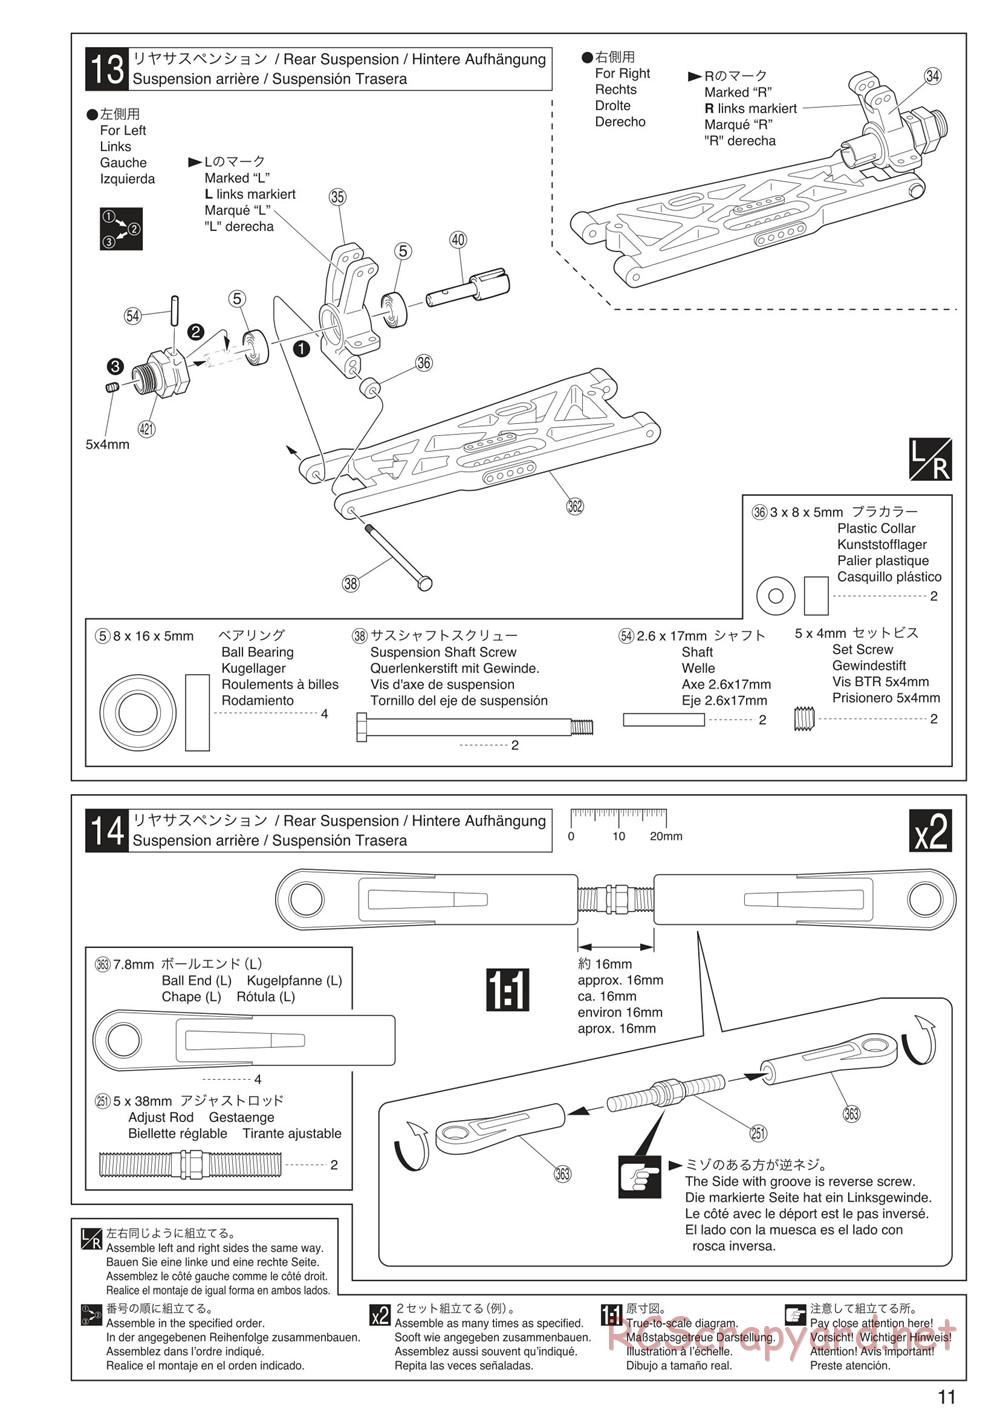 Kyosho - Inferno Neo ST 3.0 - Manual - Page 11